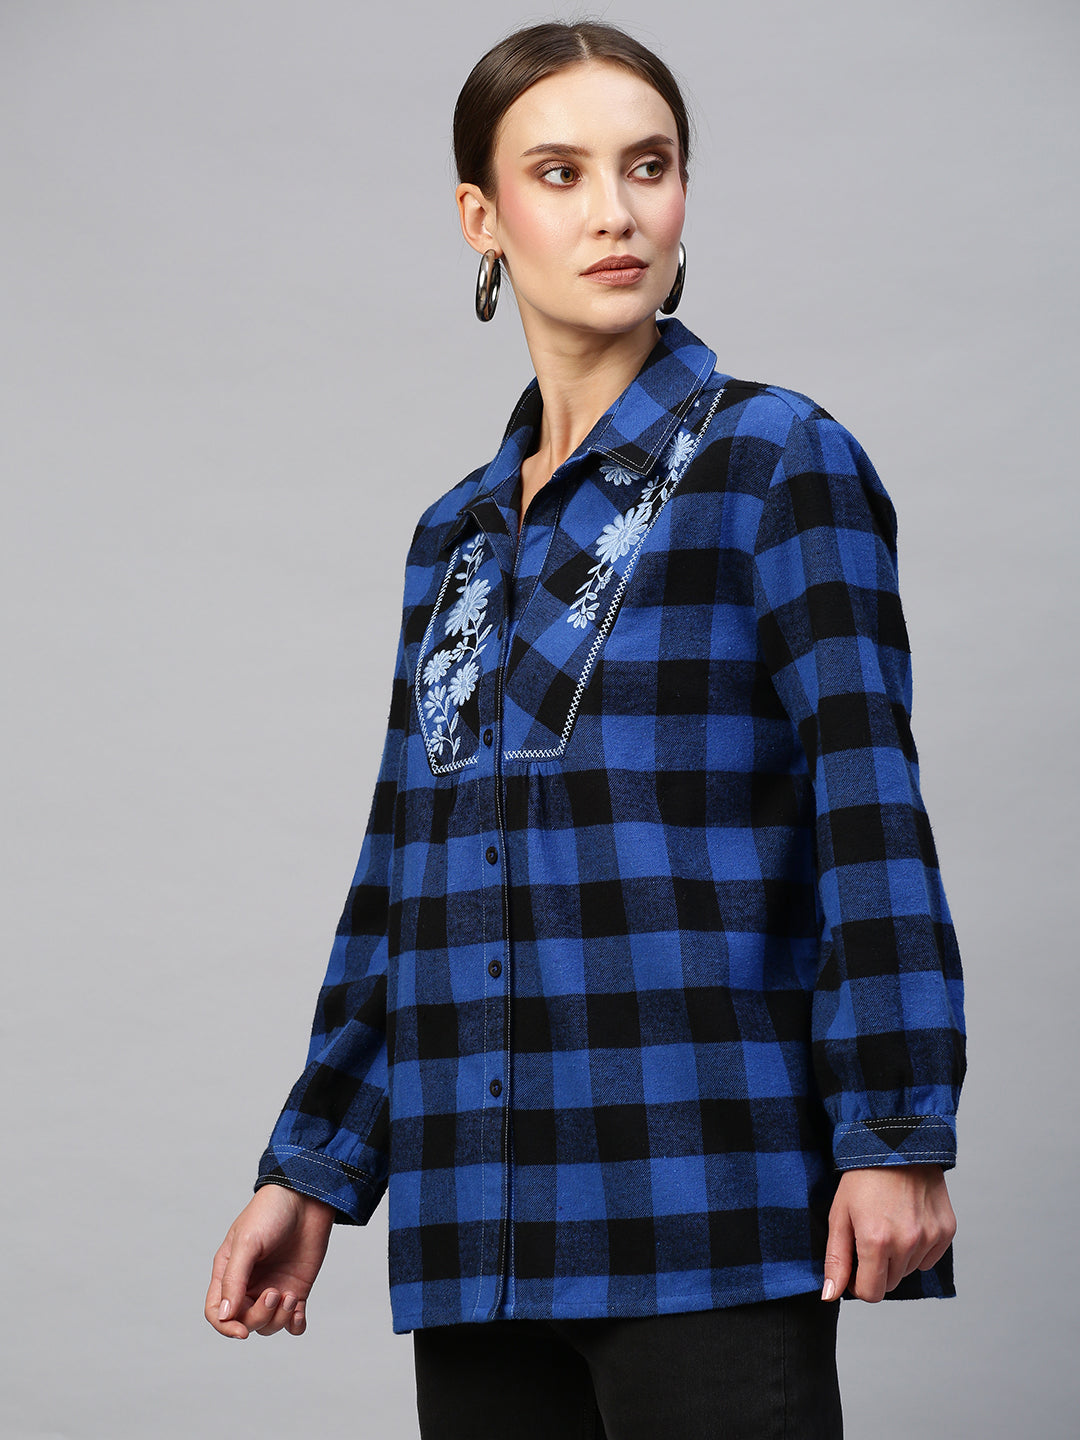 Embroidered Yoke Brushed Flannel Gingham Plaid Shirt